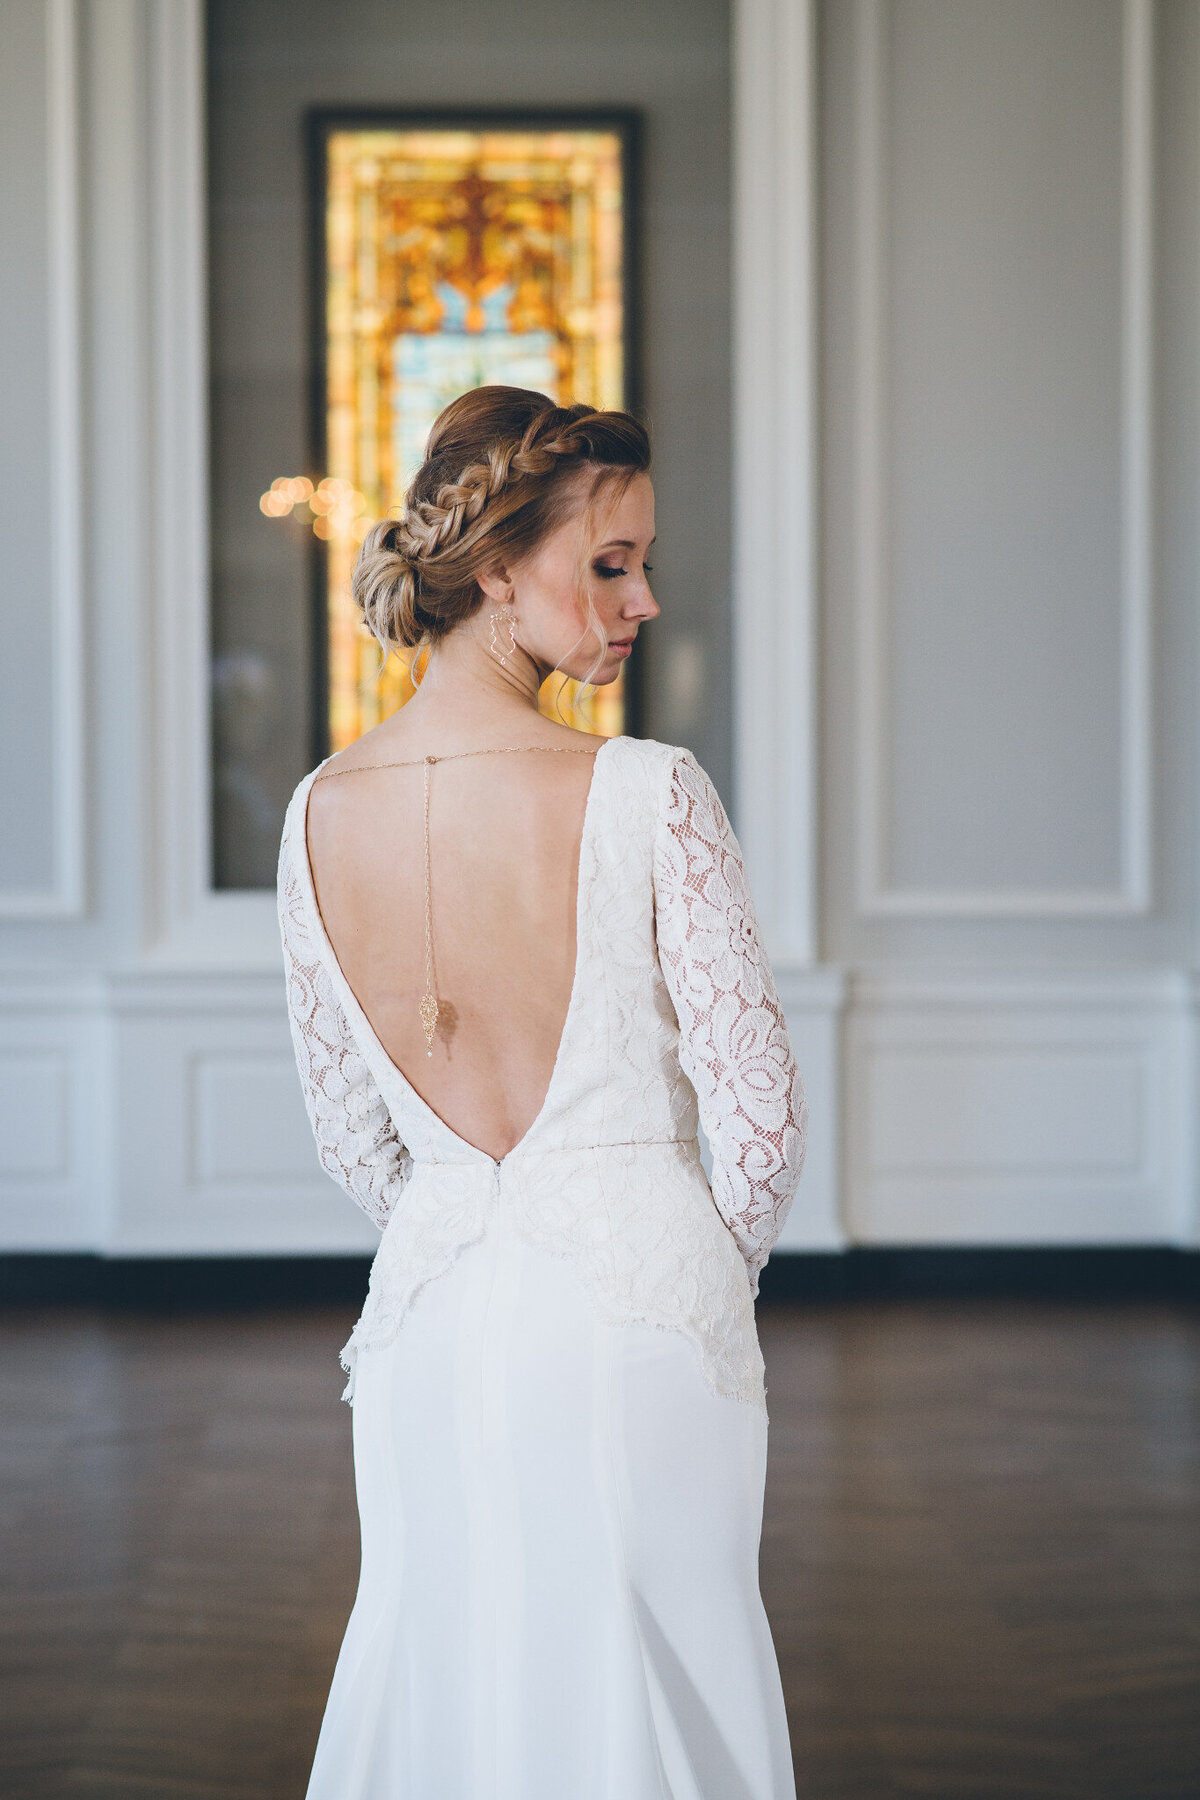 The center of the low v-back on the Bibi wedding dress style guides your eye down to the peak of the lace scallop edge just below the waistline.